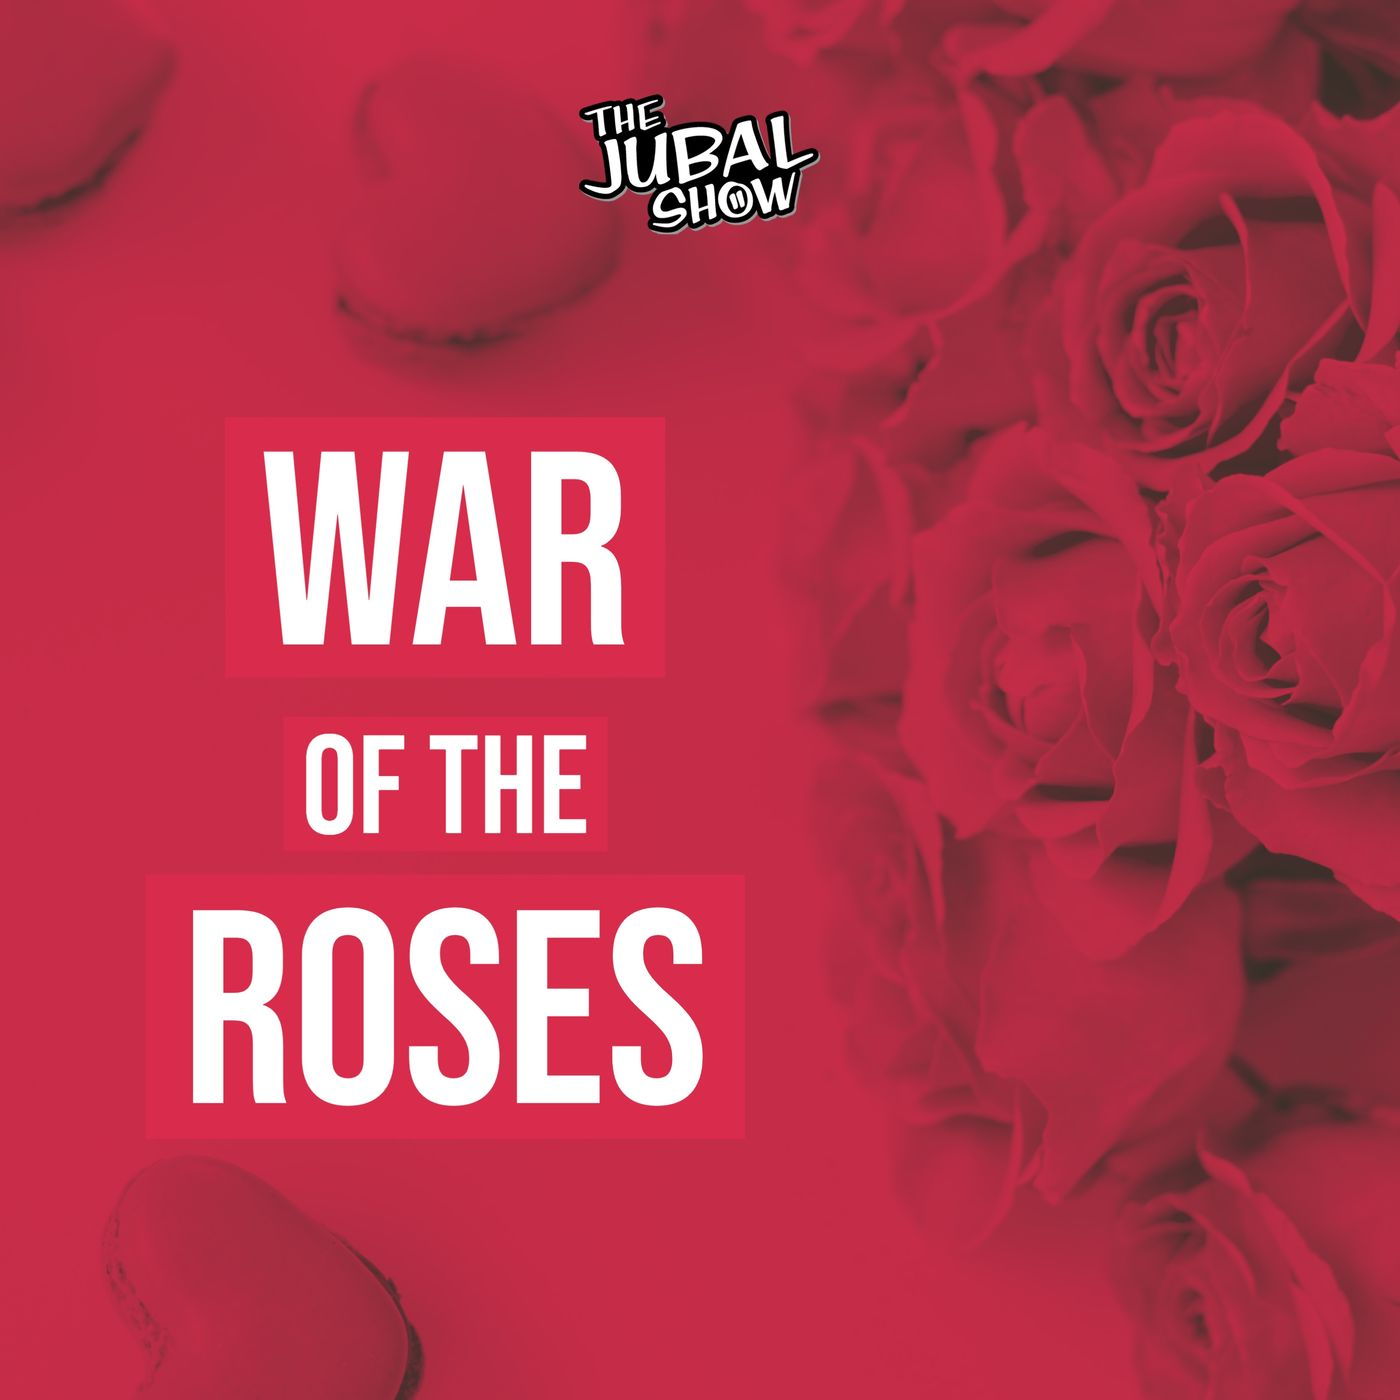 This War Of The Roses He Told Her He Would Cheat!